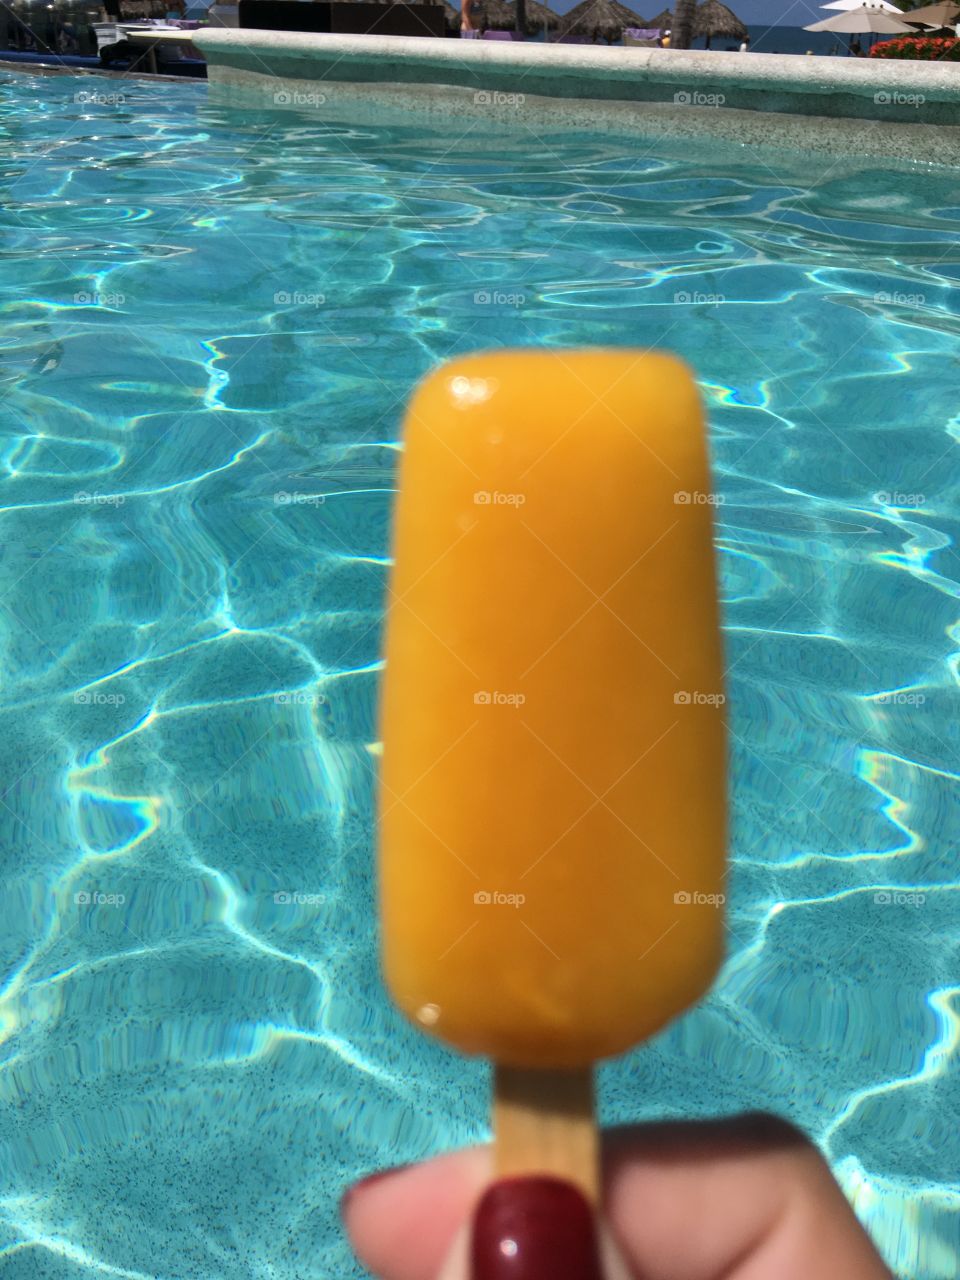 popsicle in the pool 